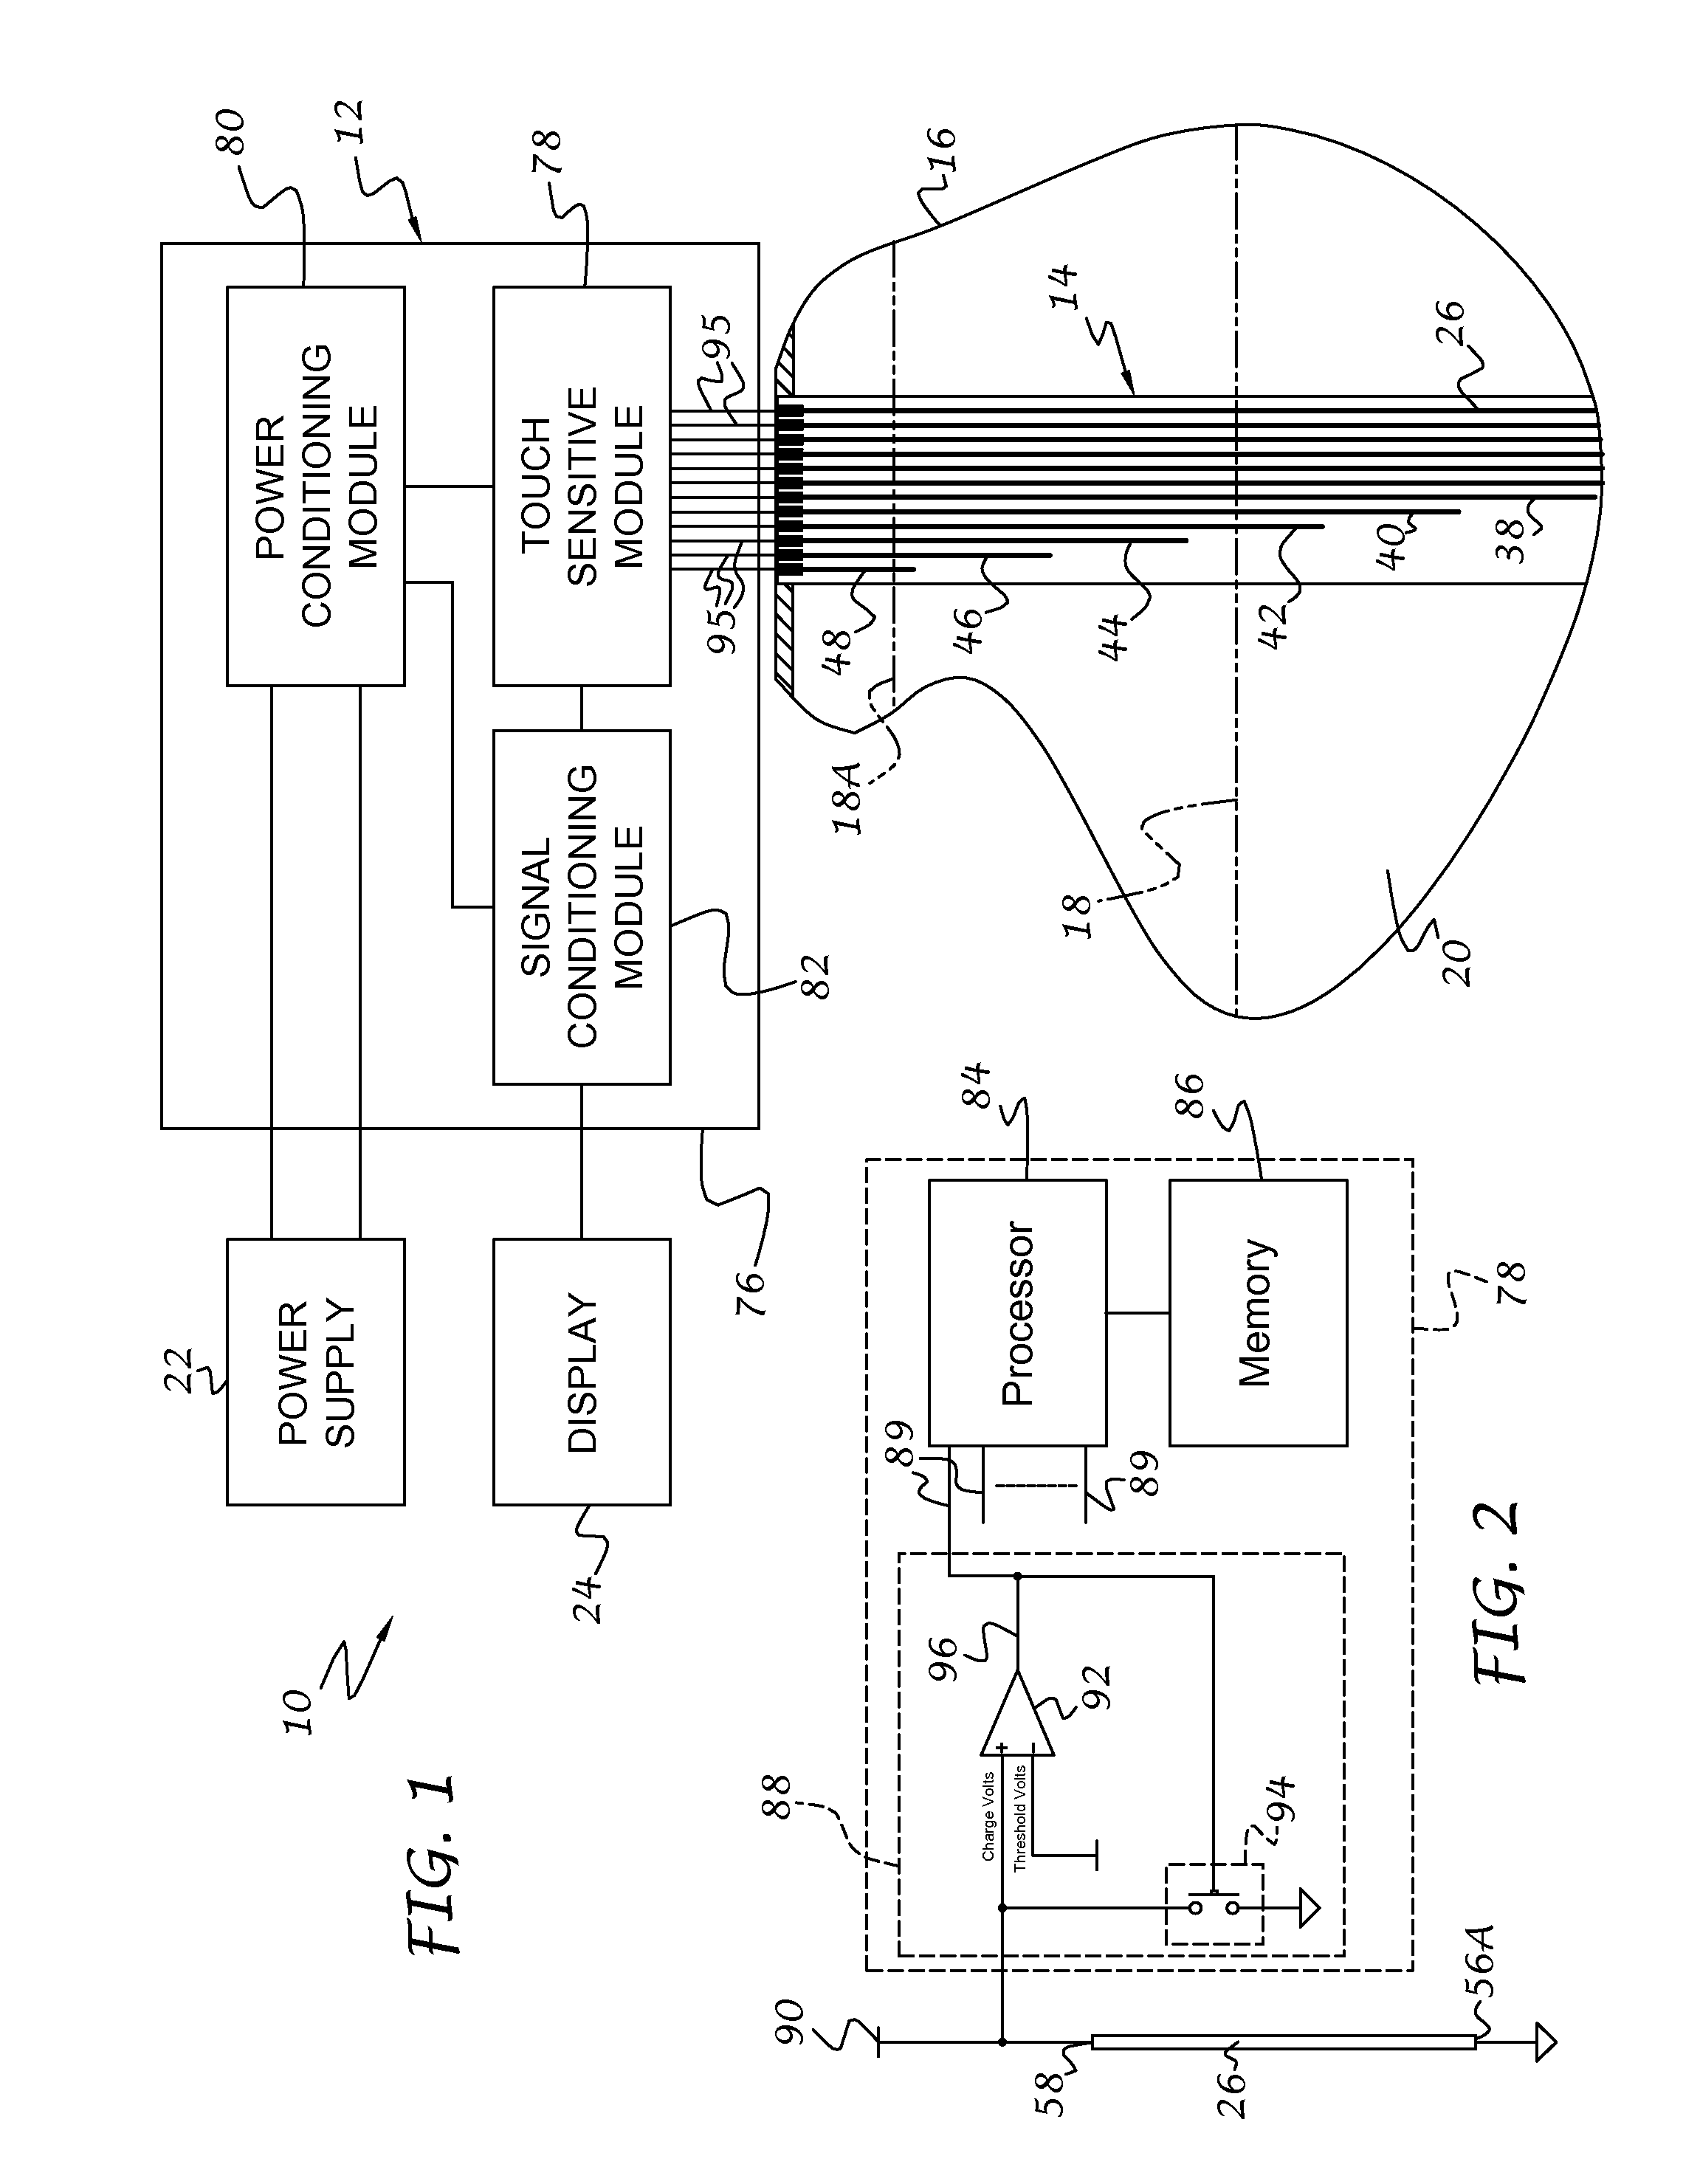 Capacitive sensor assembly for determining relative position